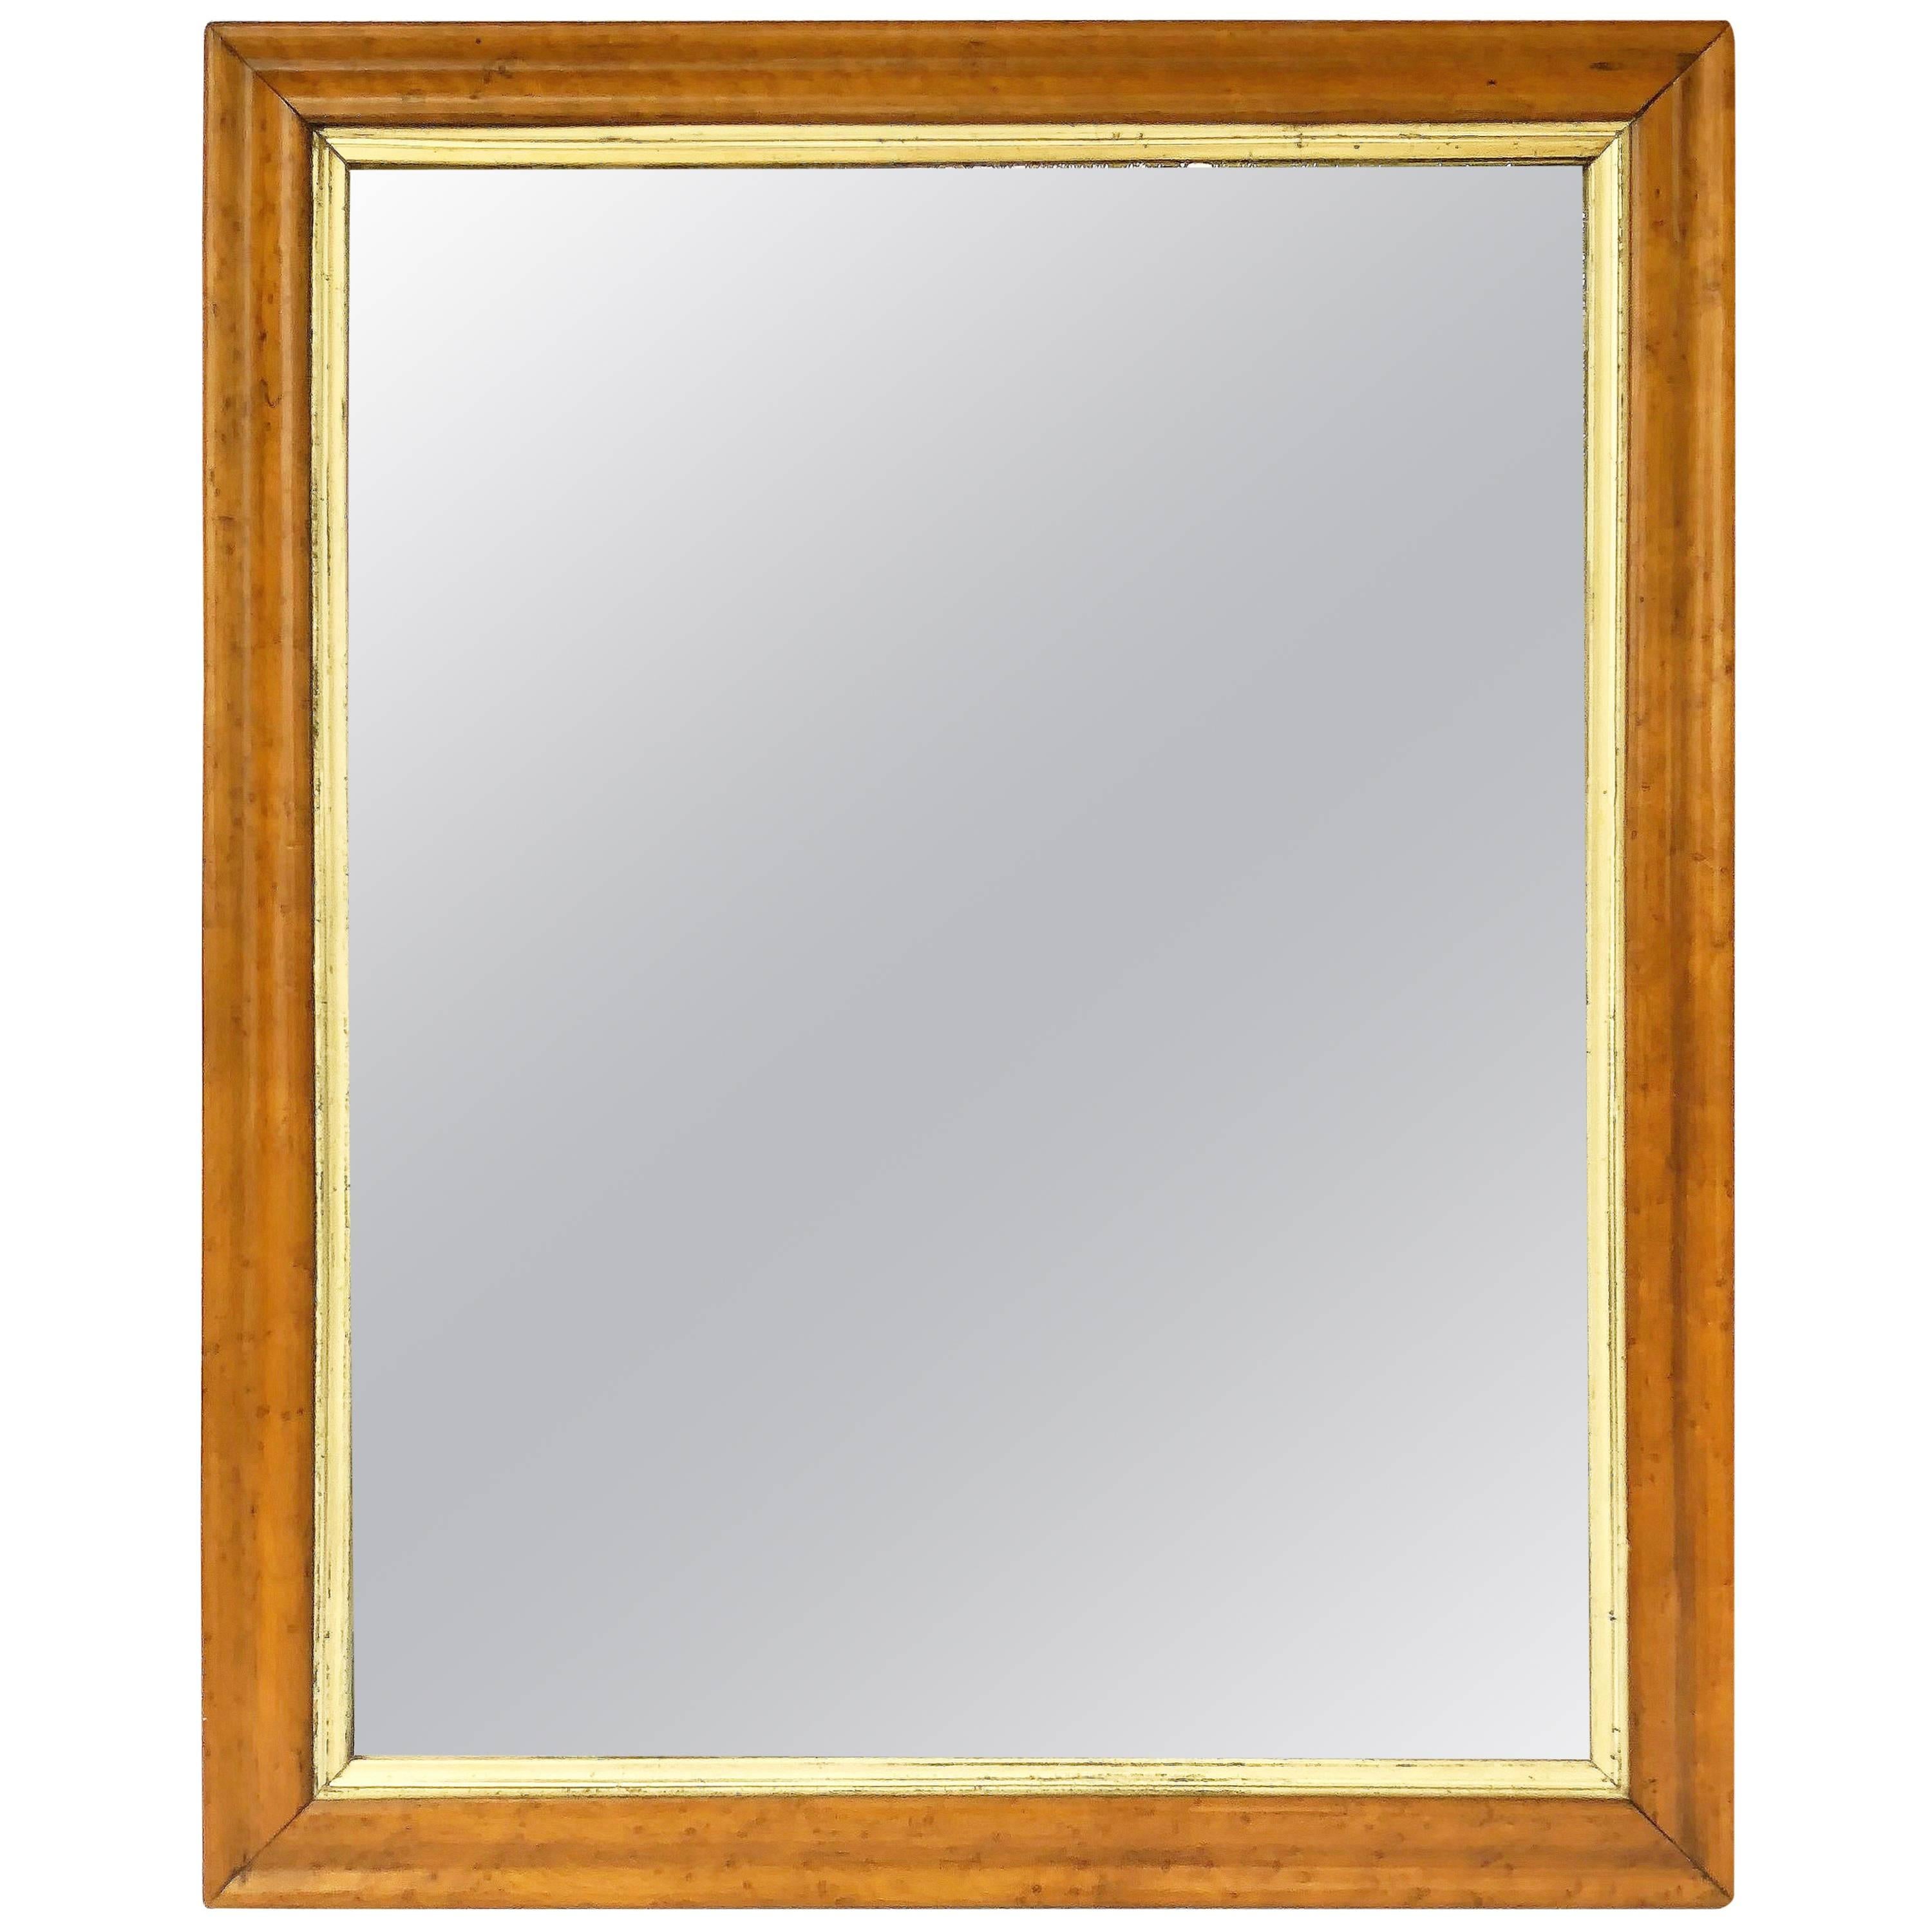 English Rectangular Maple and Giltwood Framed Mirror (H 32 x W 26)